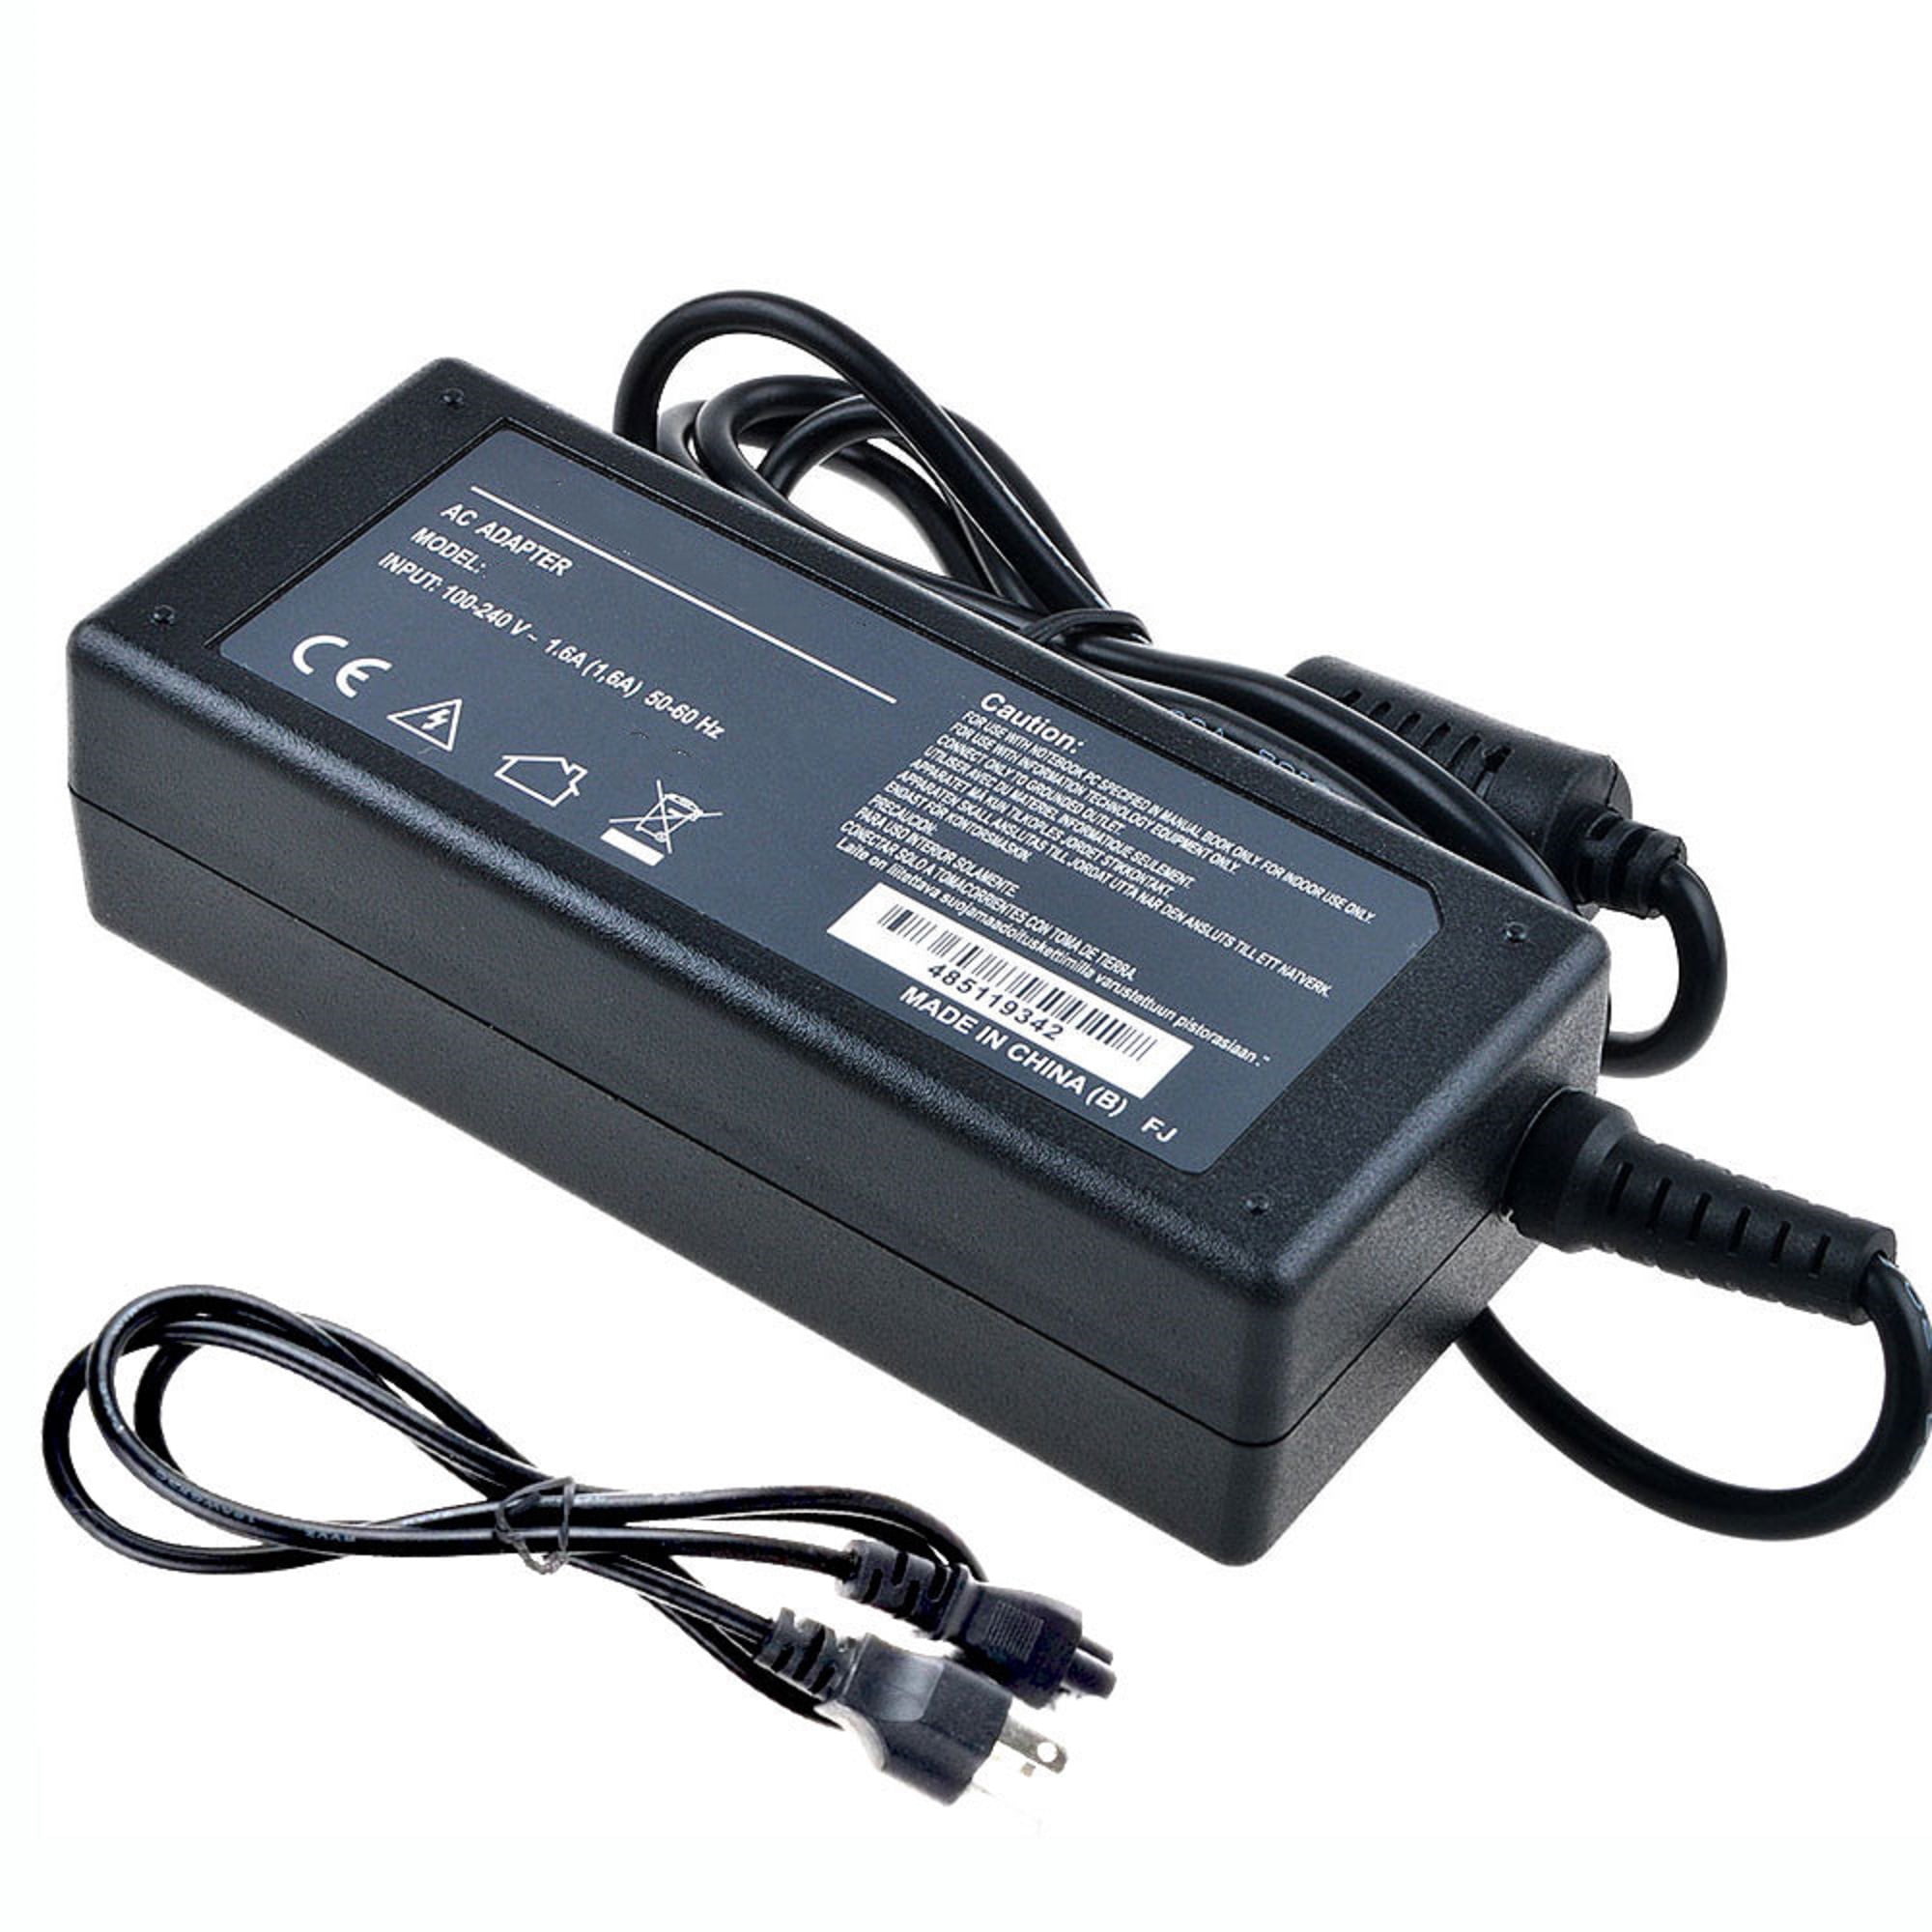 New AC Adapter For GME GFP361DA-1230-1 P/N PLD36-12D Power Supply Cord Charger 